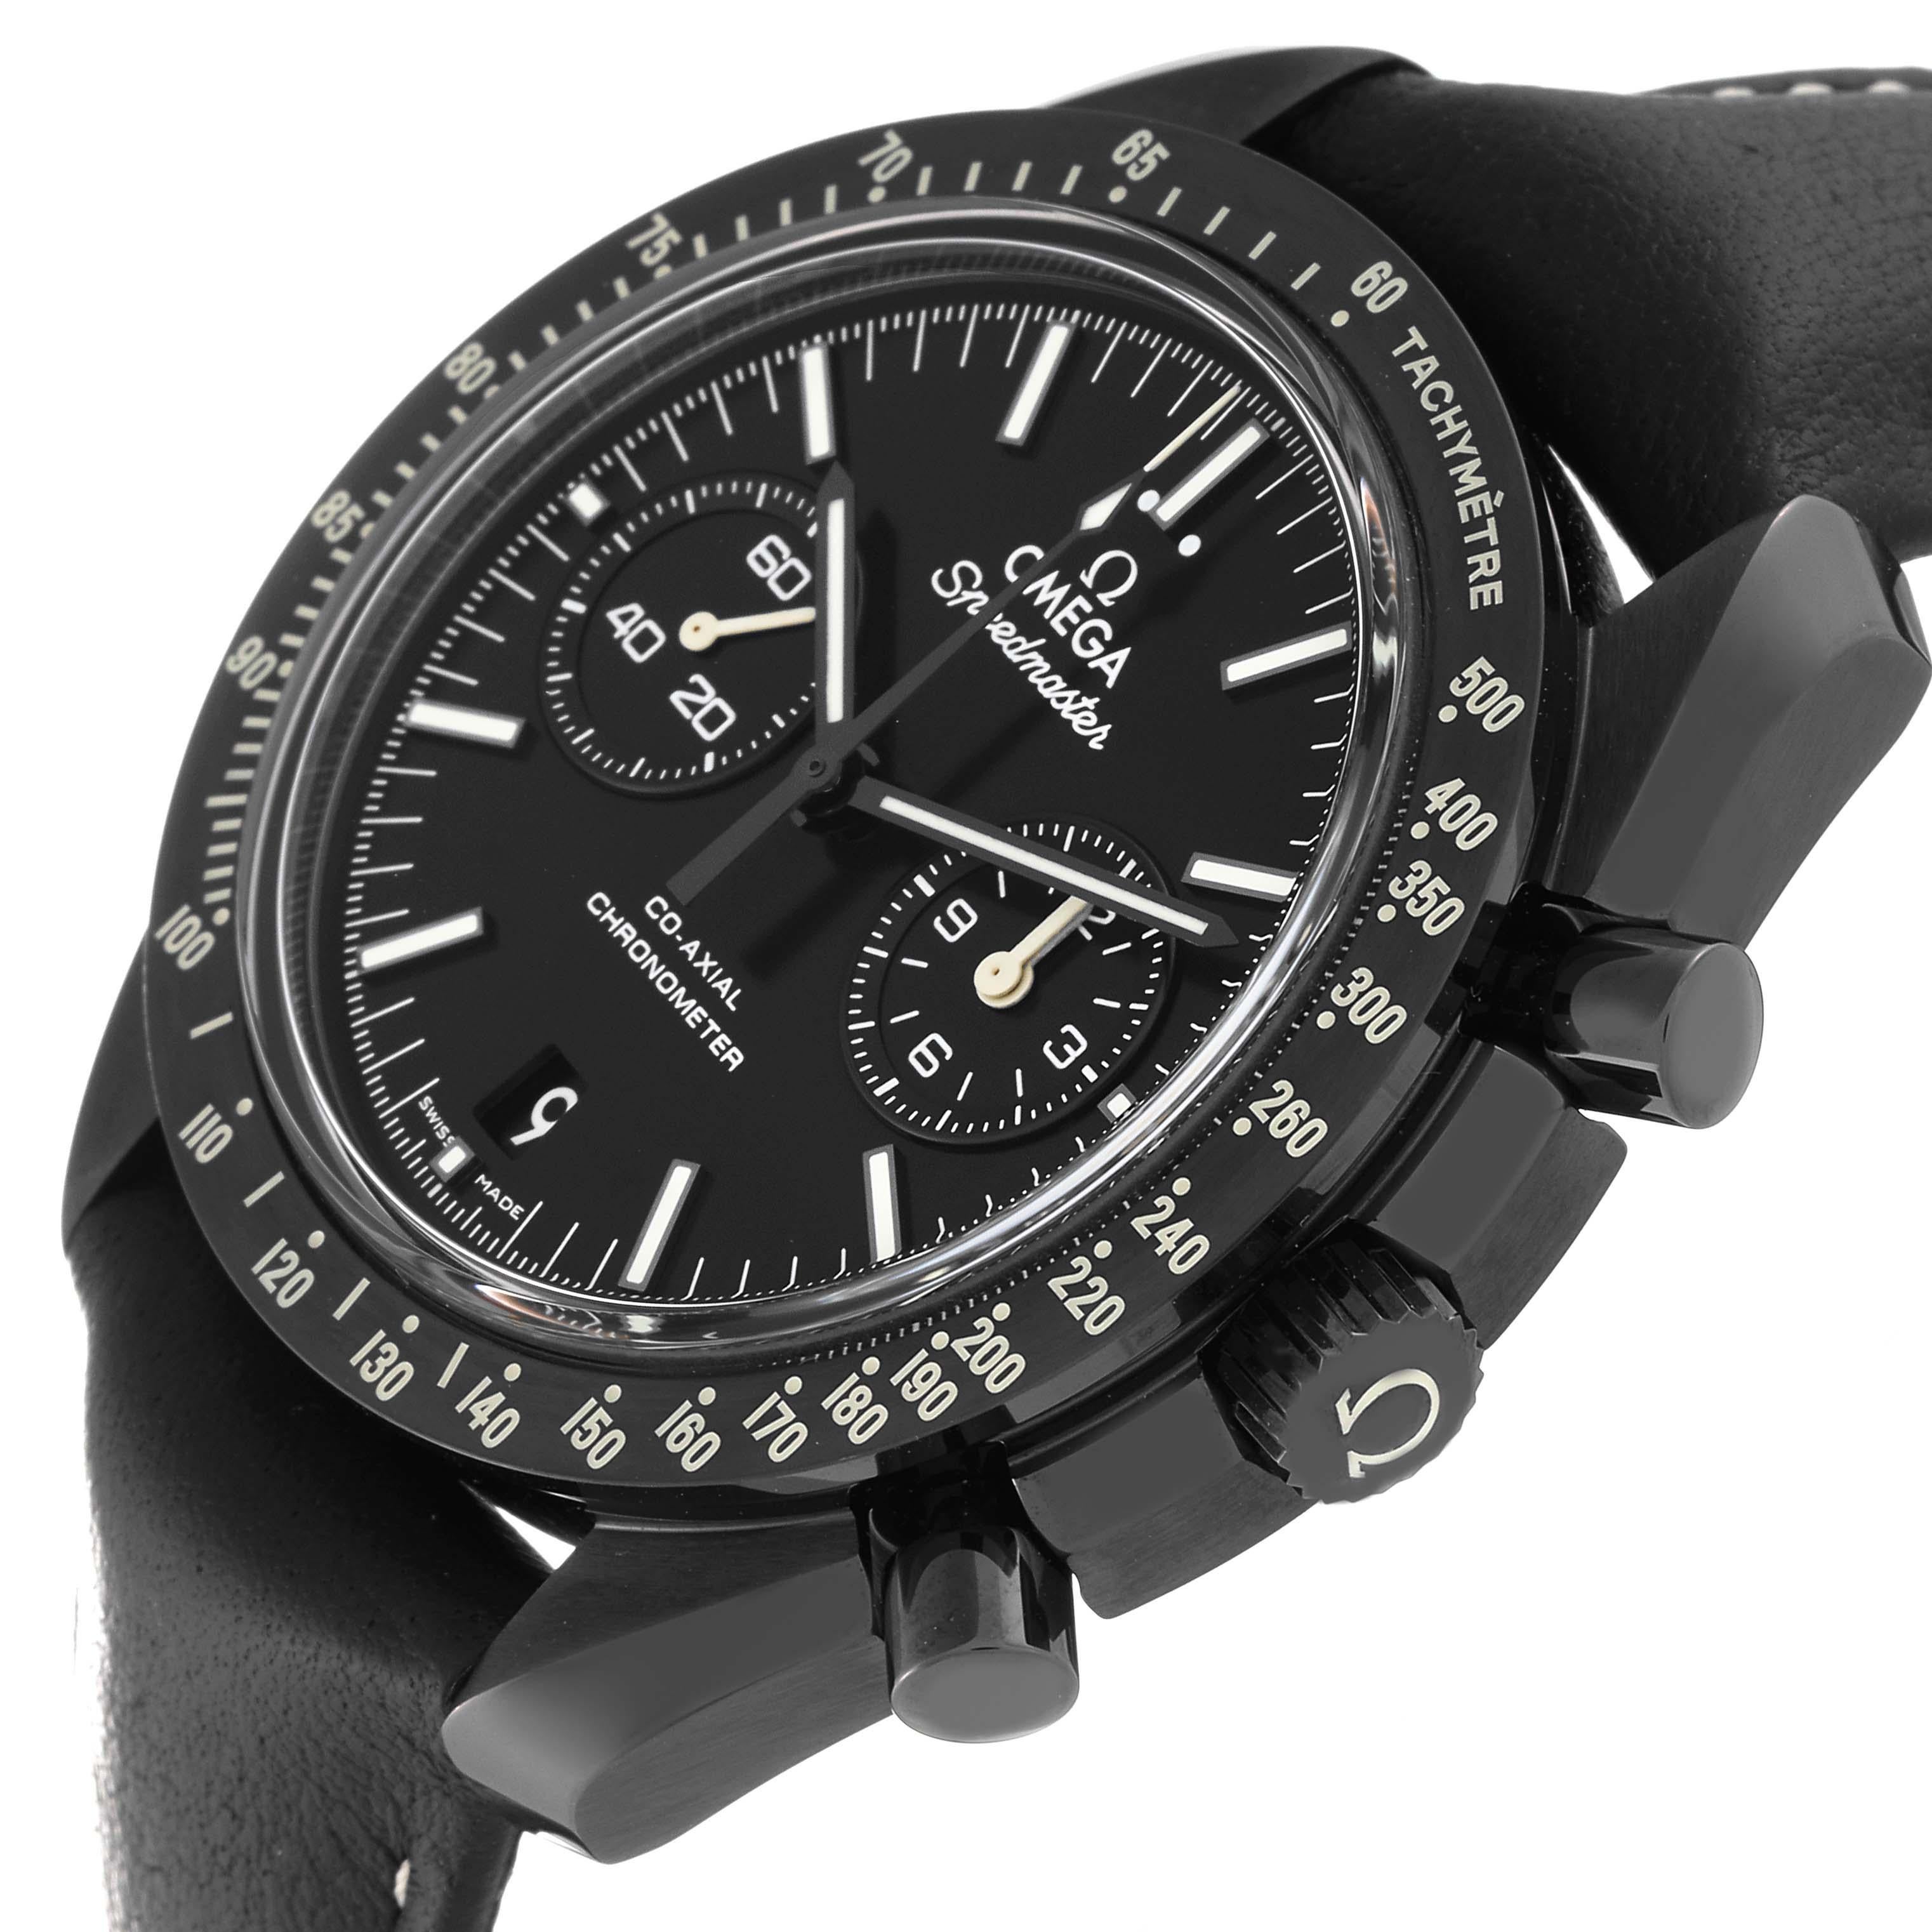 Omega Speedmaster Pitch Dark Side of the Moon Mens Watch 311.92.44.51.01.004 For Sale 4